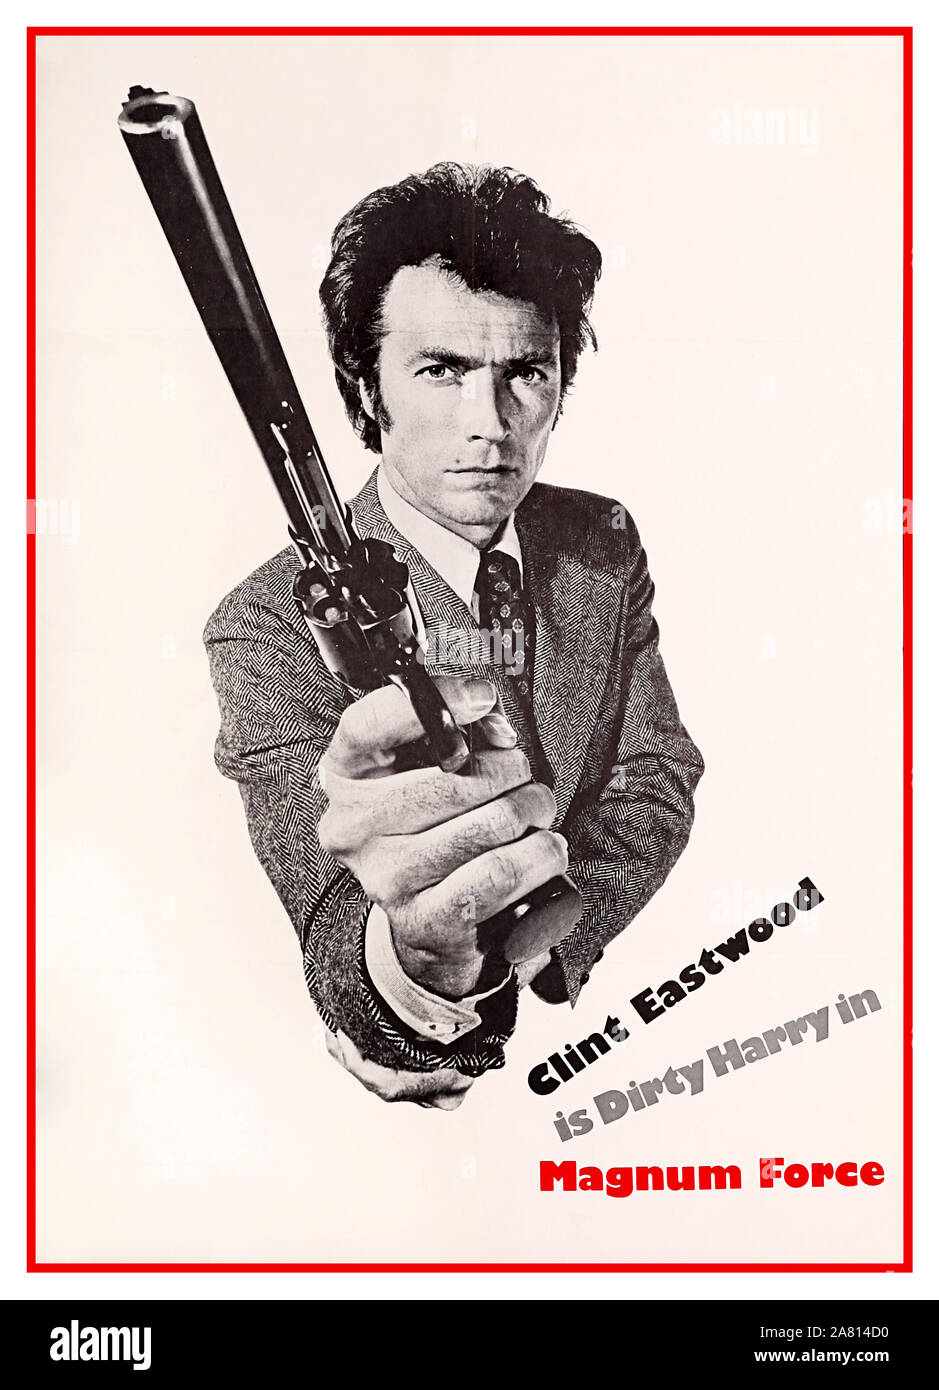 'Magnum Force Dirty Harry American Movie Film Promotional poster for 'Magnum Force' (1973) starring Clint Eastwood as Dirty Harry. This unusual format poster was produced as part of Warner Brothers 50th anniversary and was designed as a 'giveaway' to the public printed in small quantities. Magnum Force is a 1973 American action thriller and the second to feature Clint Eastwood as maverick cop Harry Callahan Starring StarringClint Eastwood Hal Holbrook Mitchell Ryan David Soul Felton Perry Robert Urich Directed by Ted Post Stock Photo